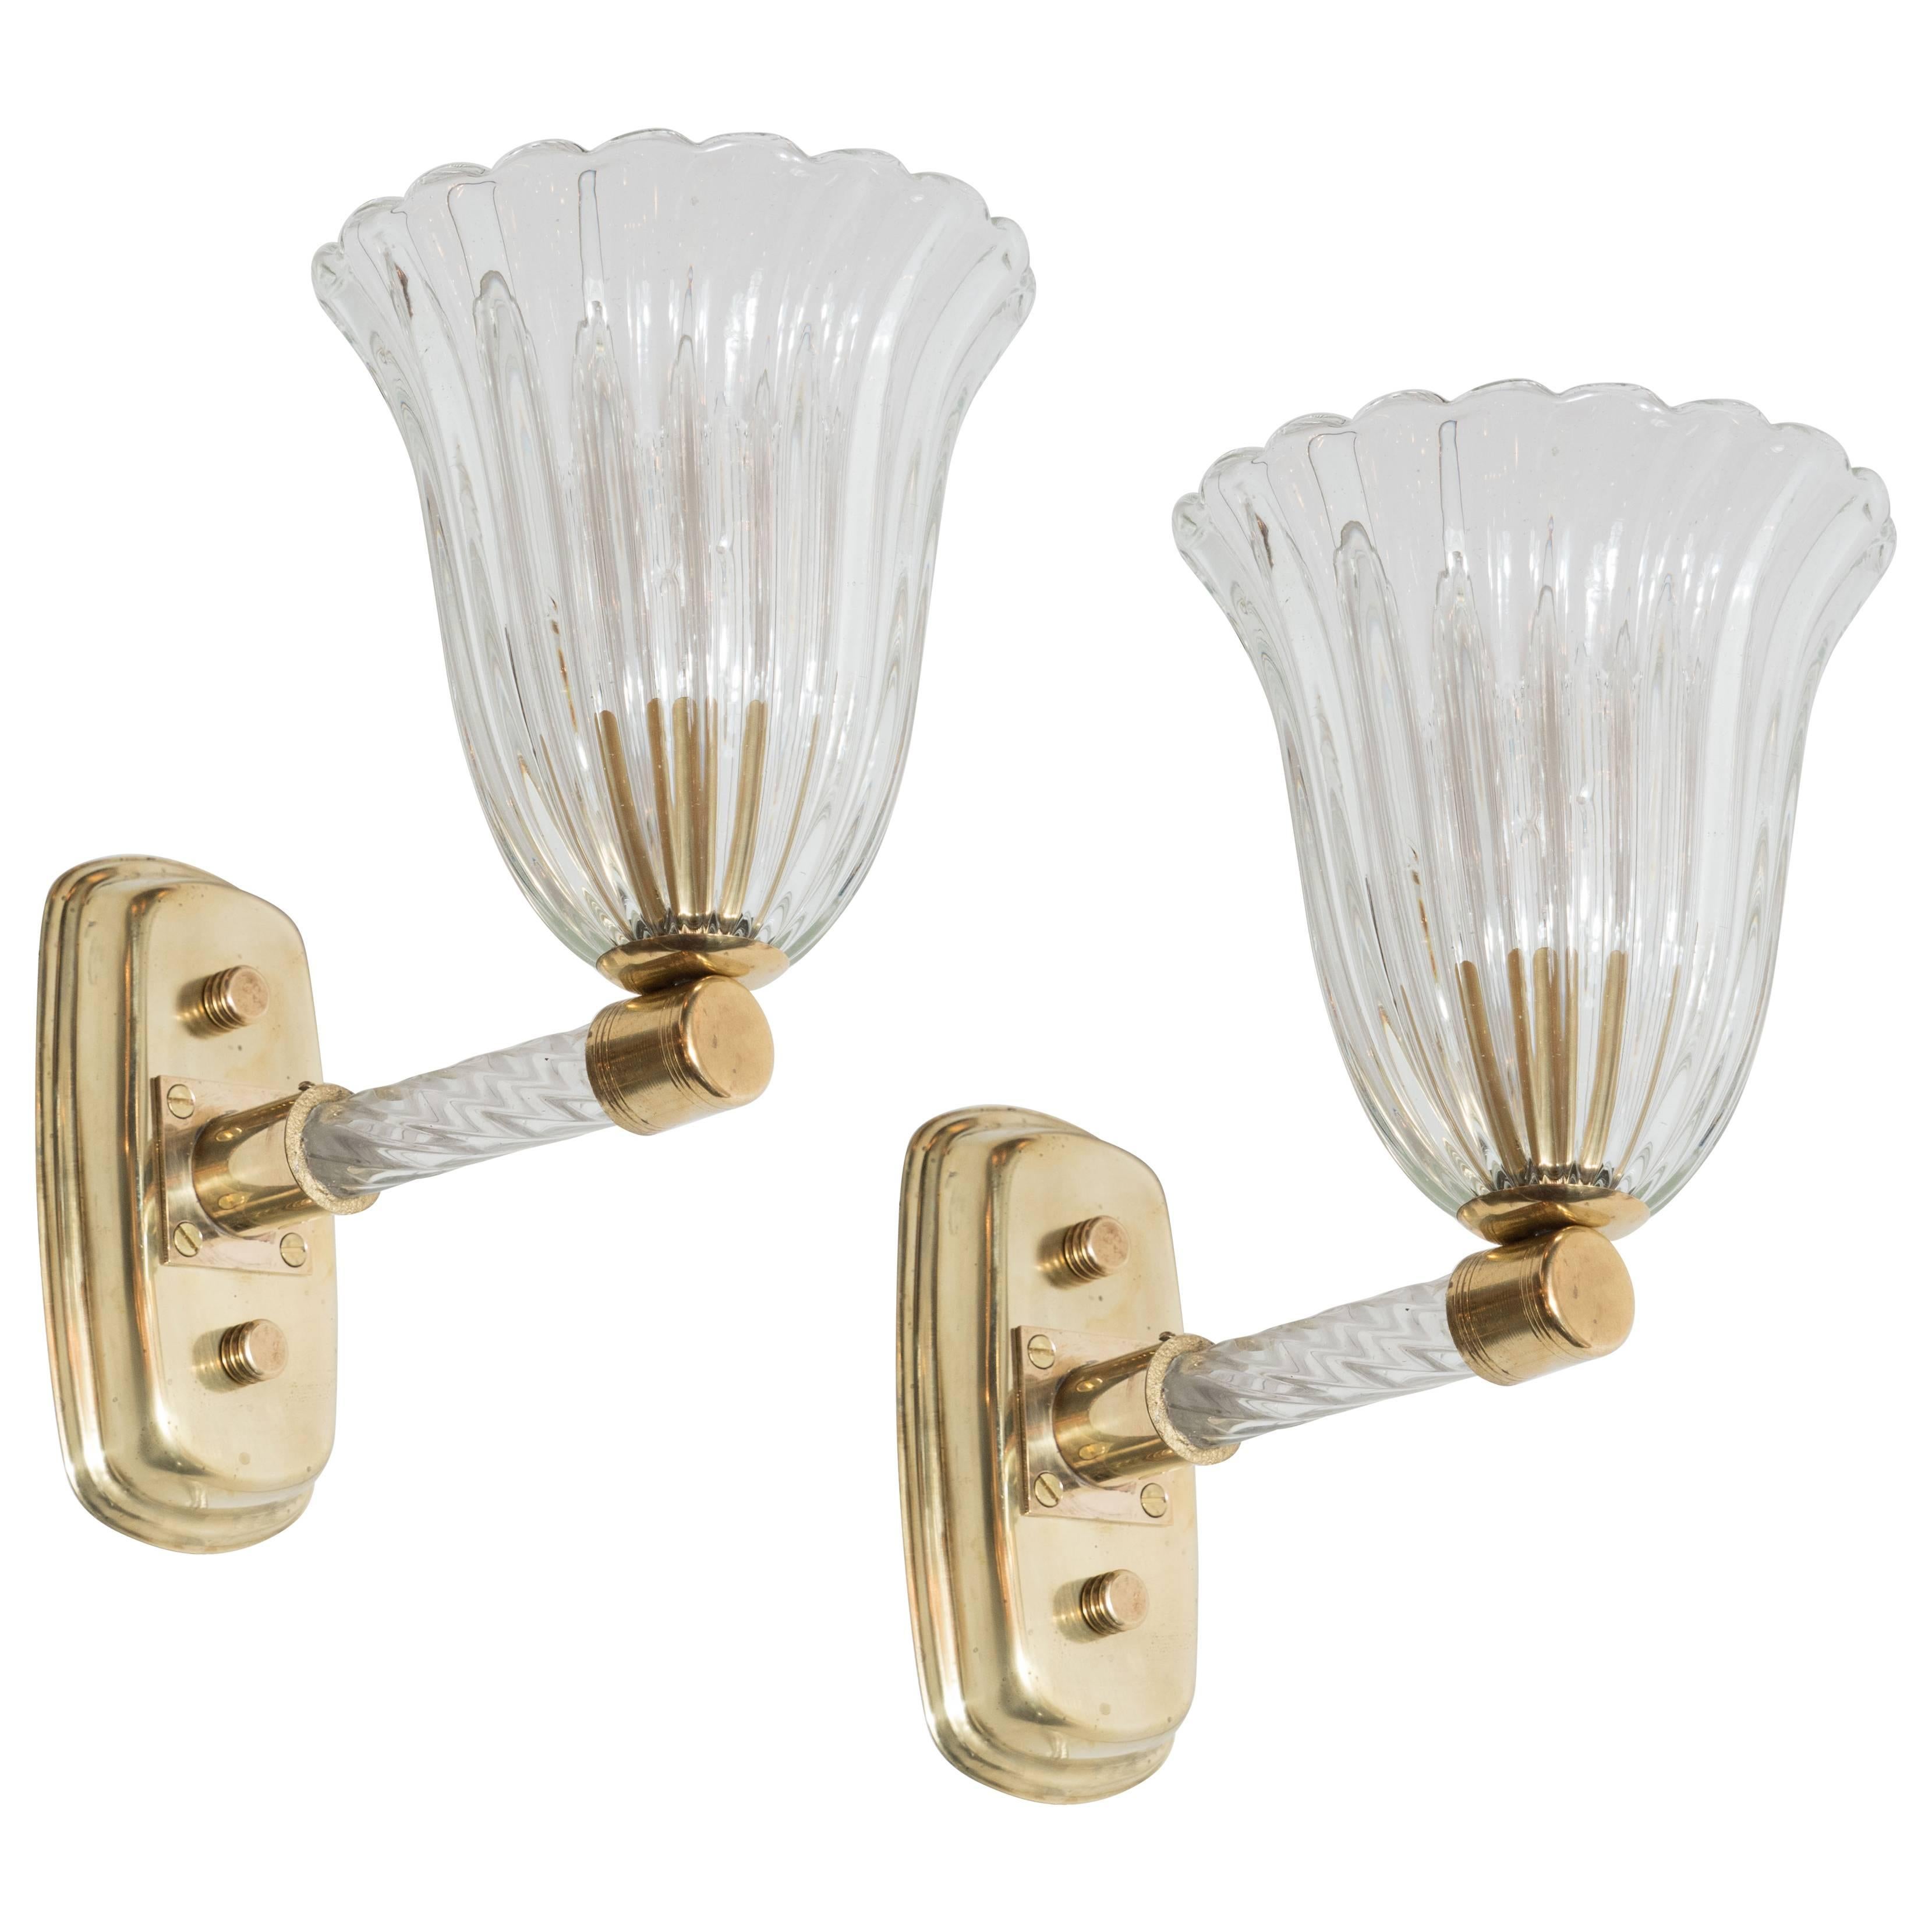 Gorgeous Pair of Mid-Century Arm Sconces in Brass and Glass by Barovier e Toso